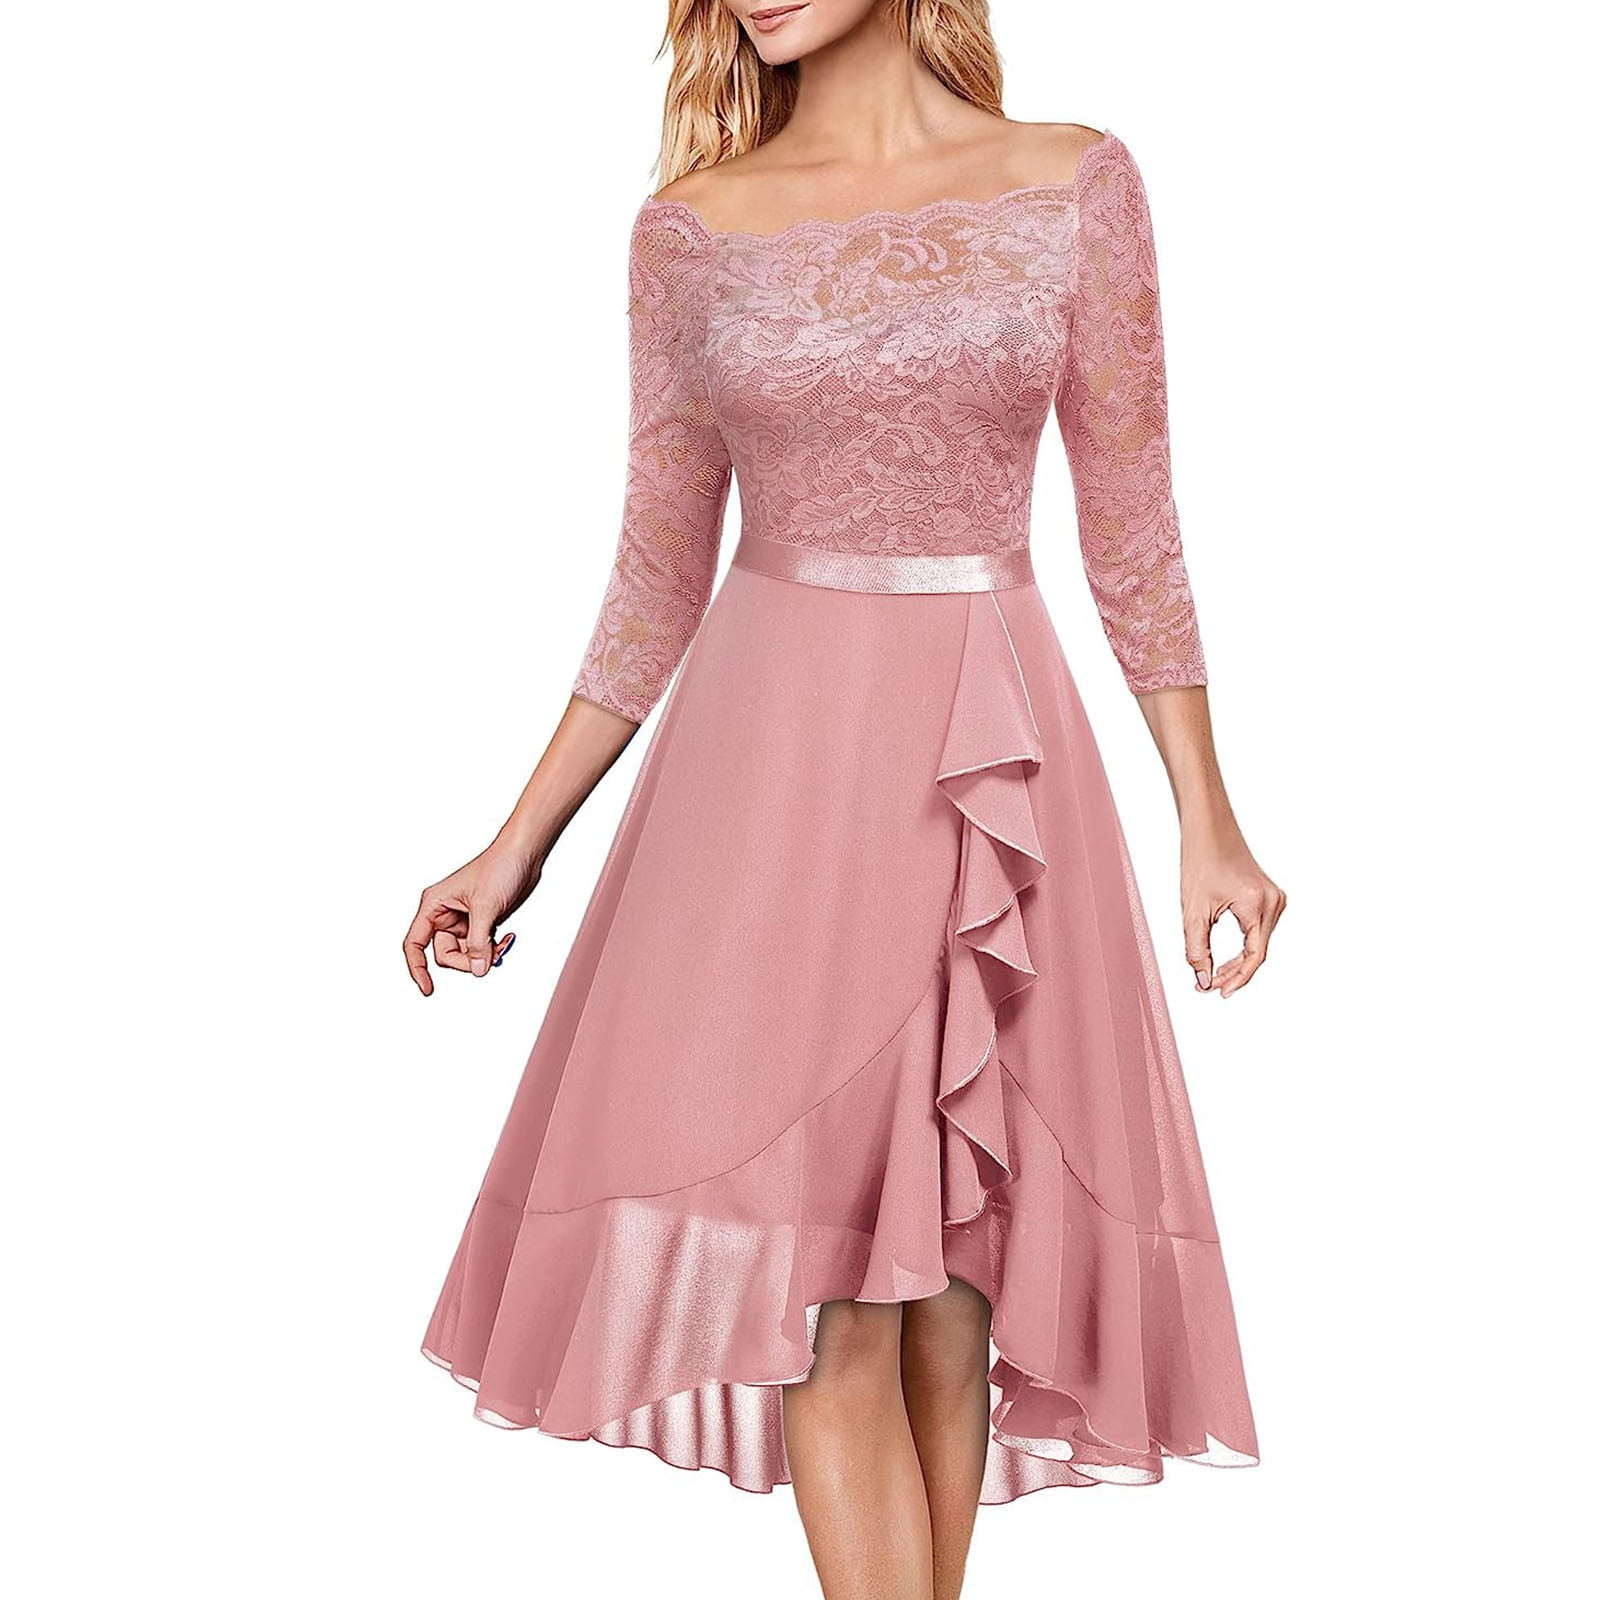 Party Dresses • Every Fit, Style & Color For The Party – americanthreads